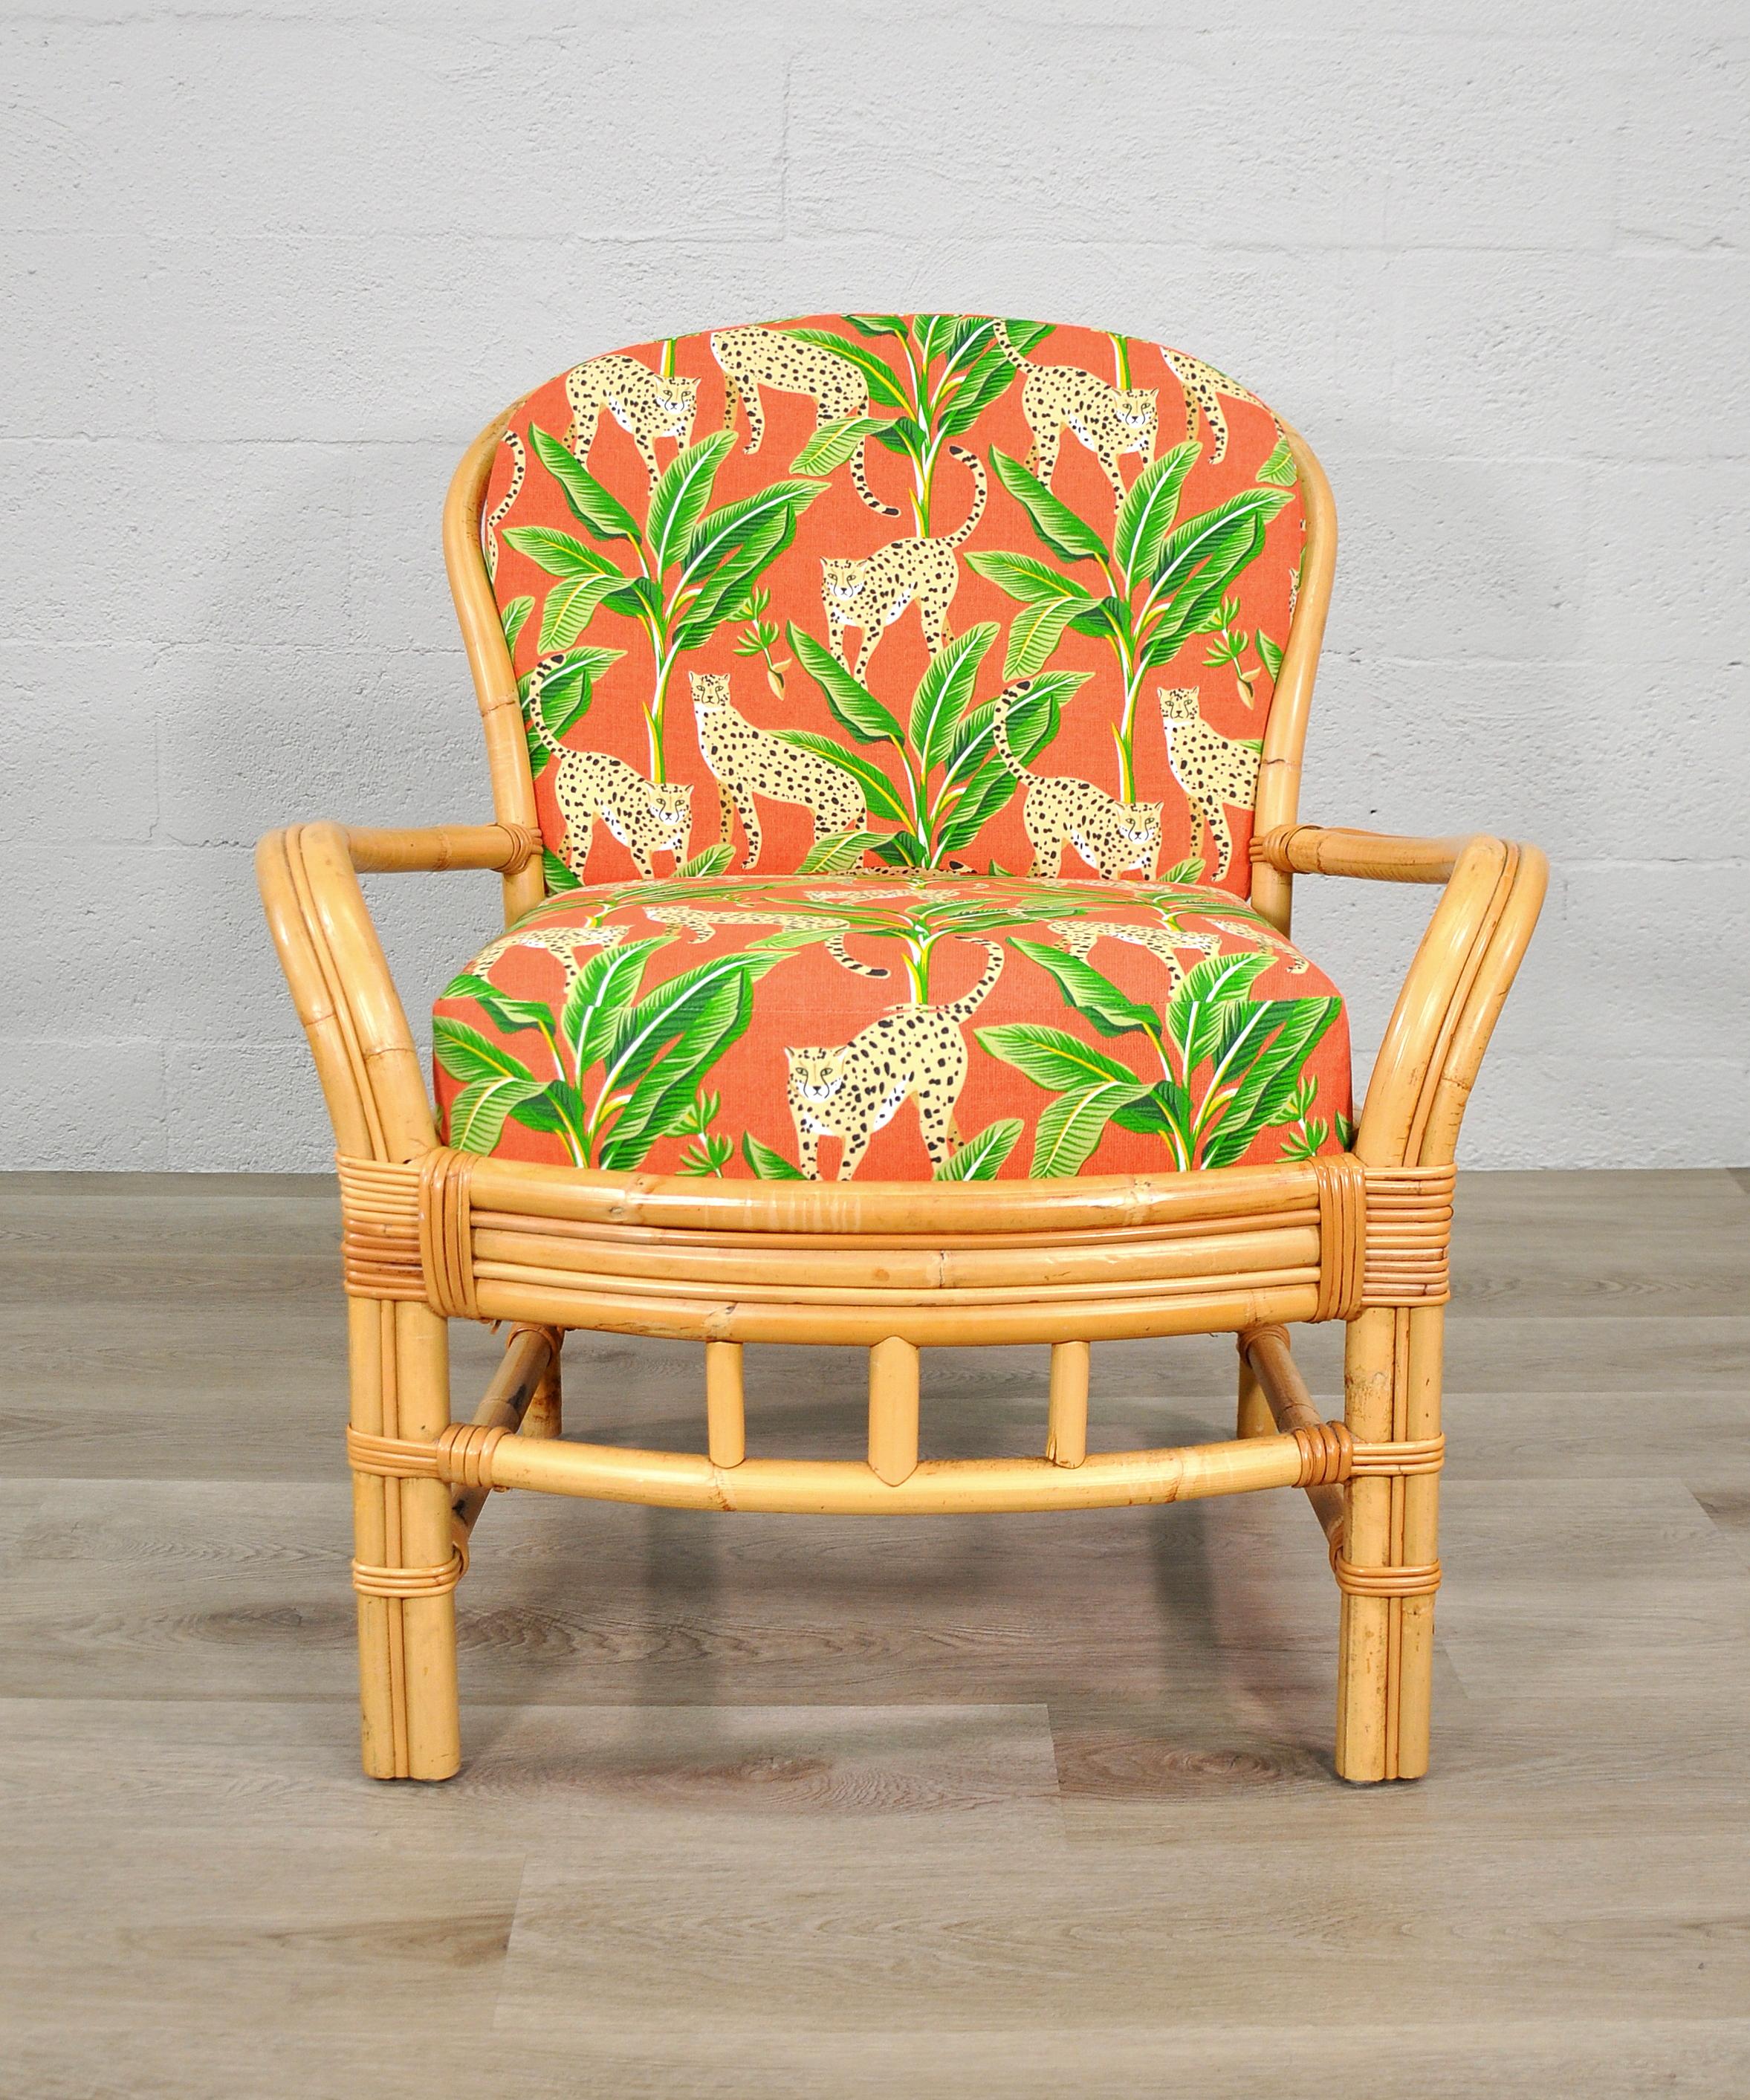 Rattan Chair with Tropical Cheetah and Palm Fabric For Sale 2